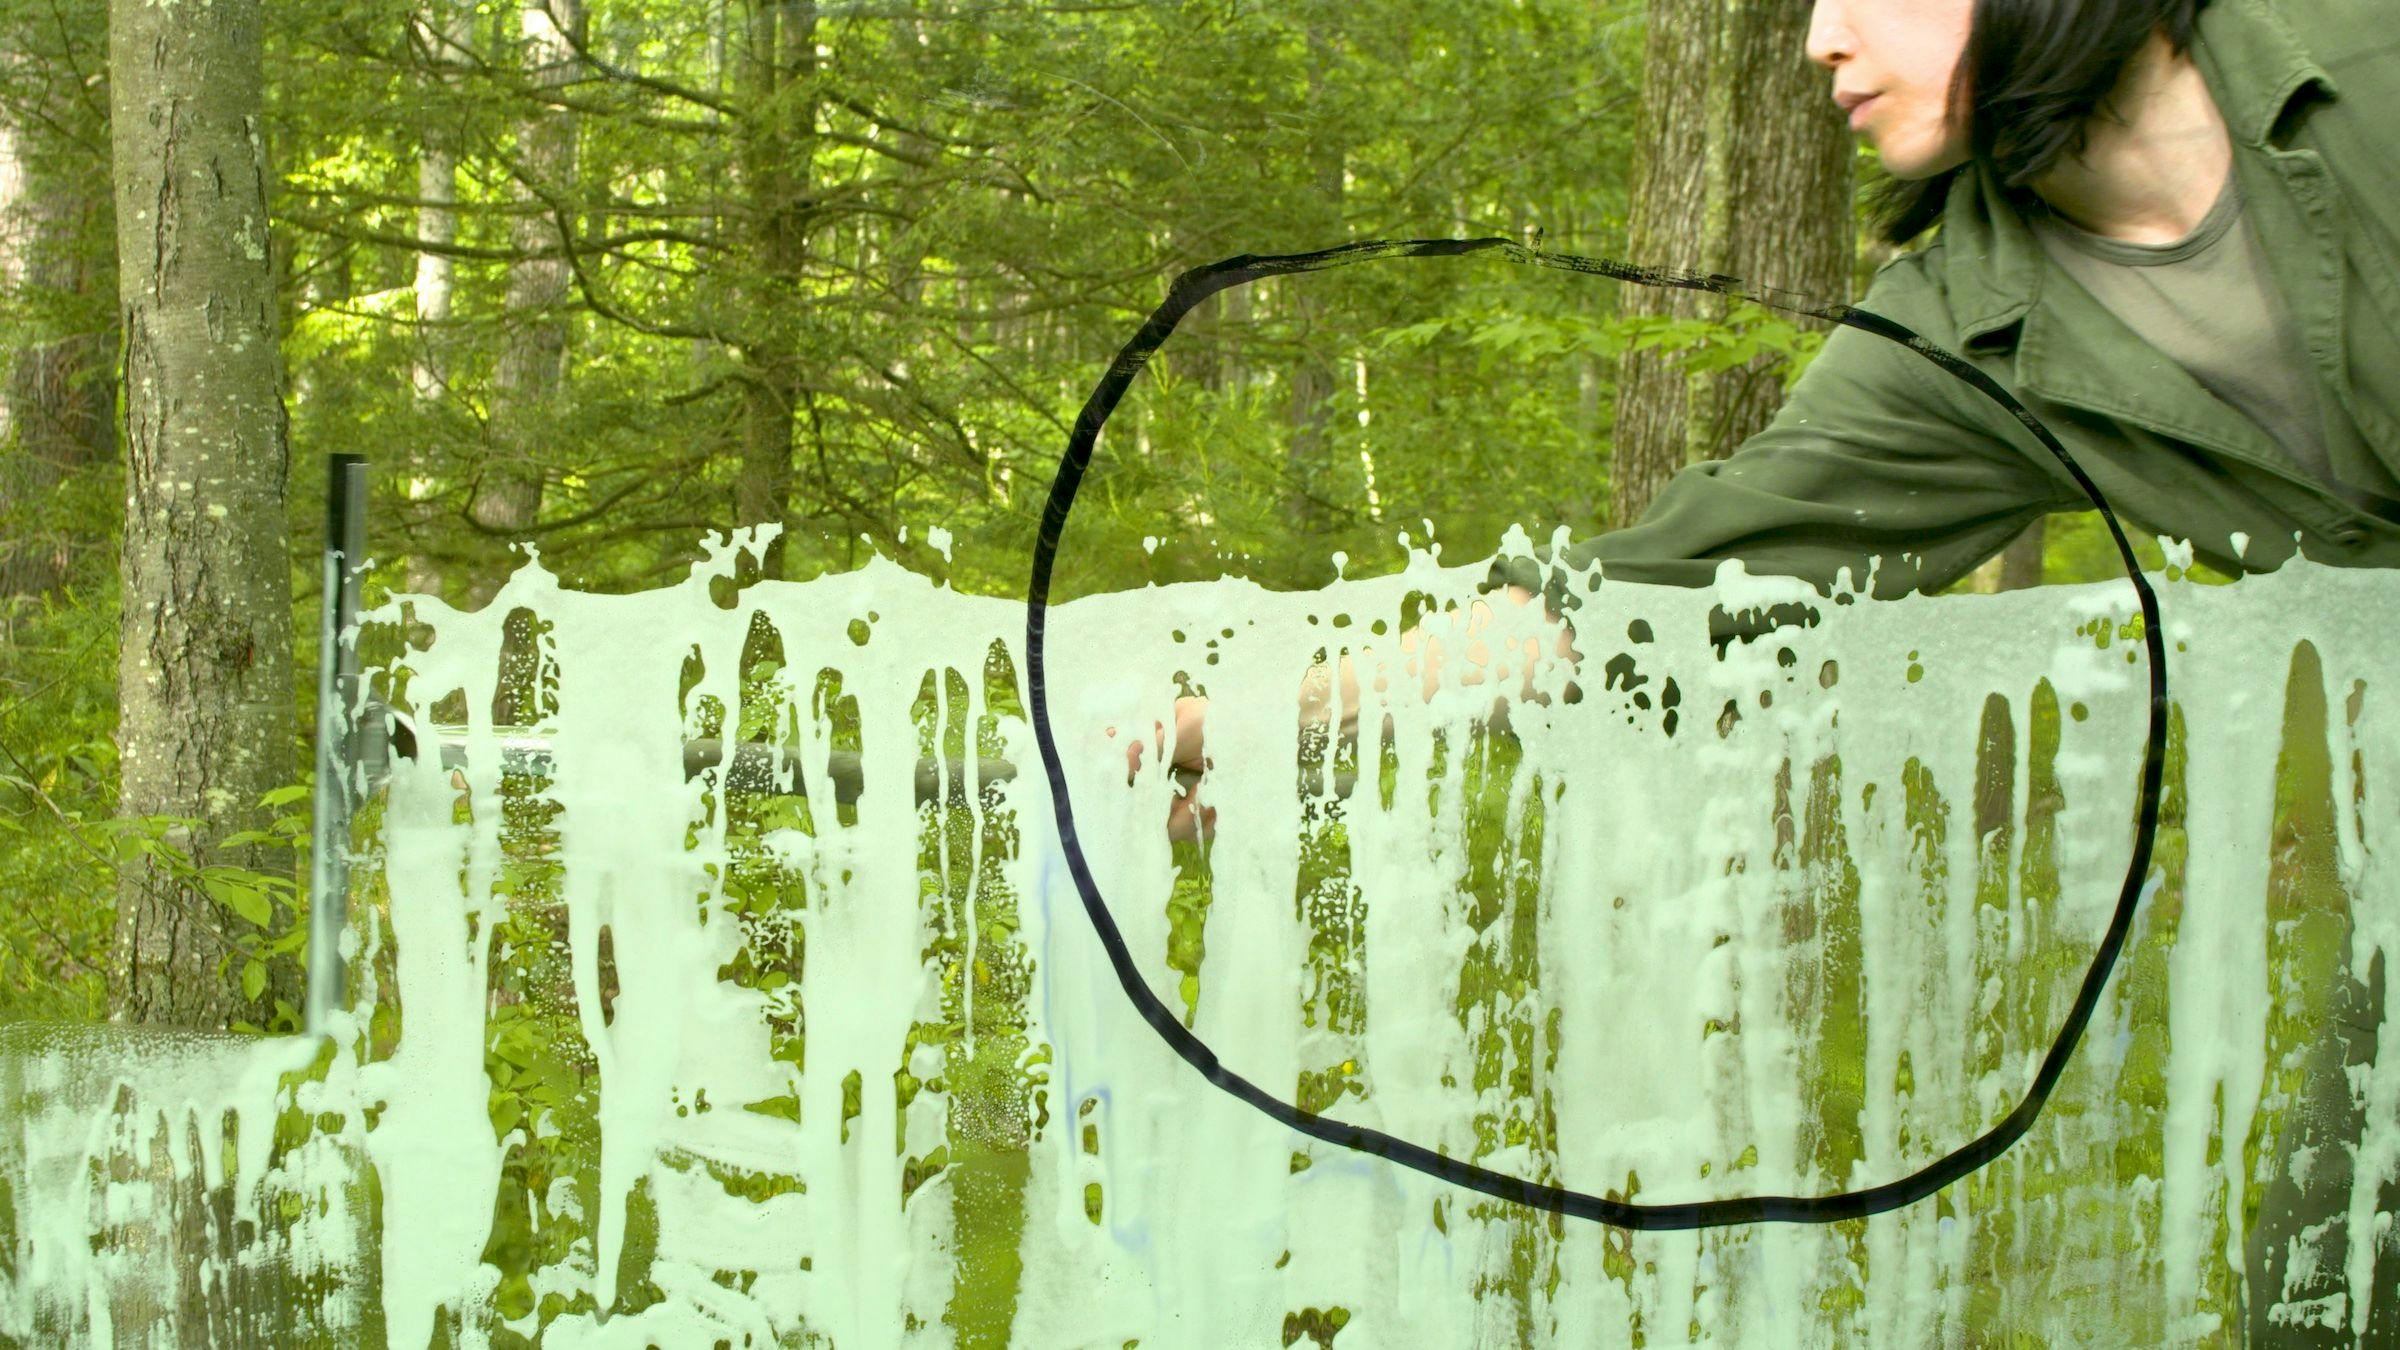 the artist has drawn a black circle on the camera lens which is filming a scene in a forest. The artist is wiping soapy suds from the camera lens